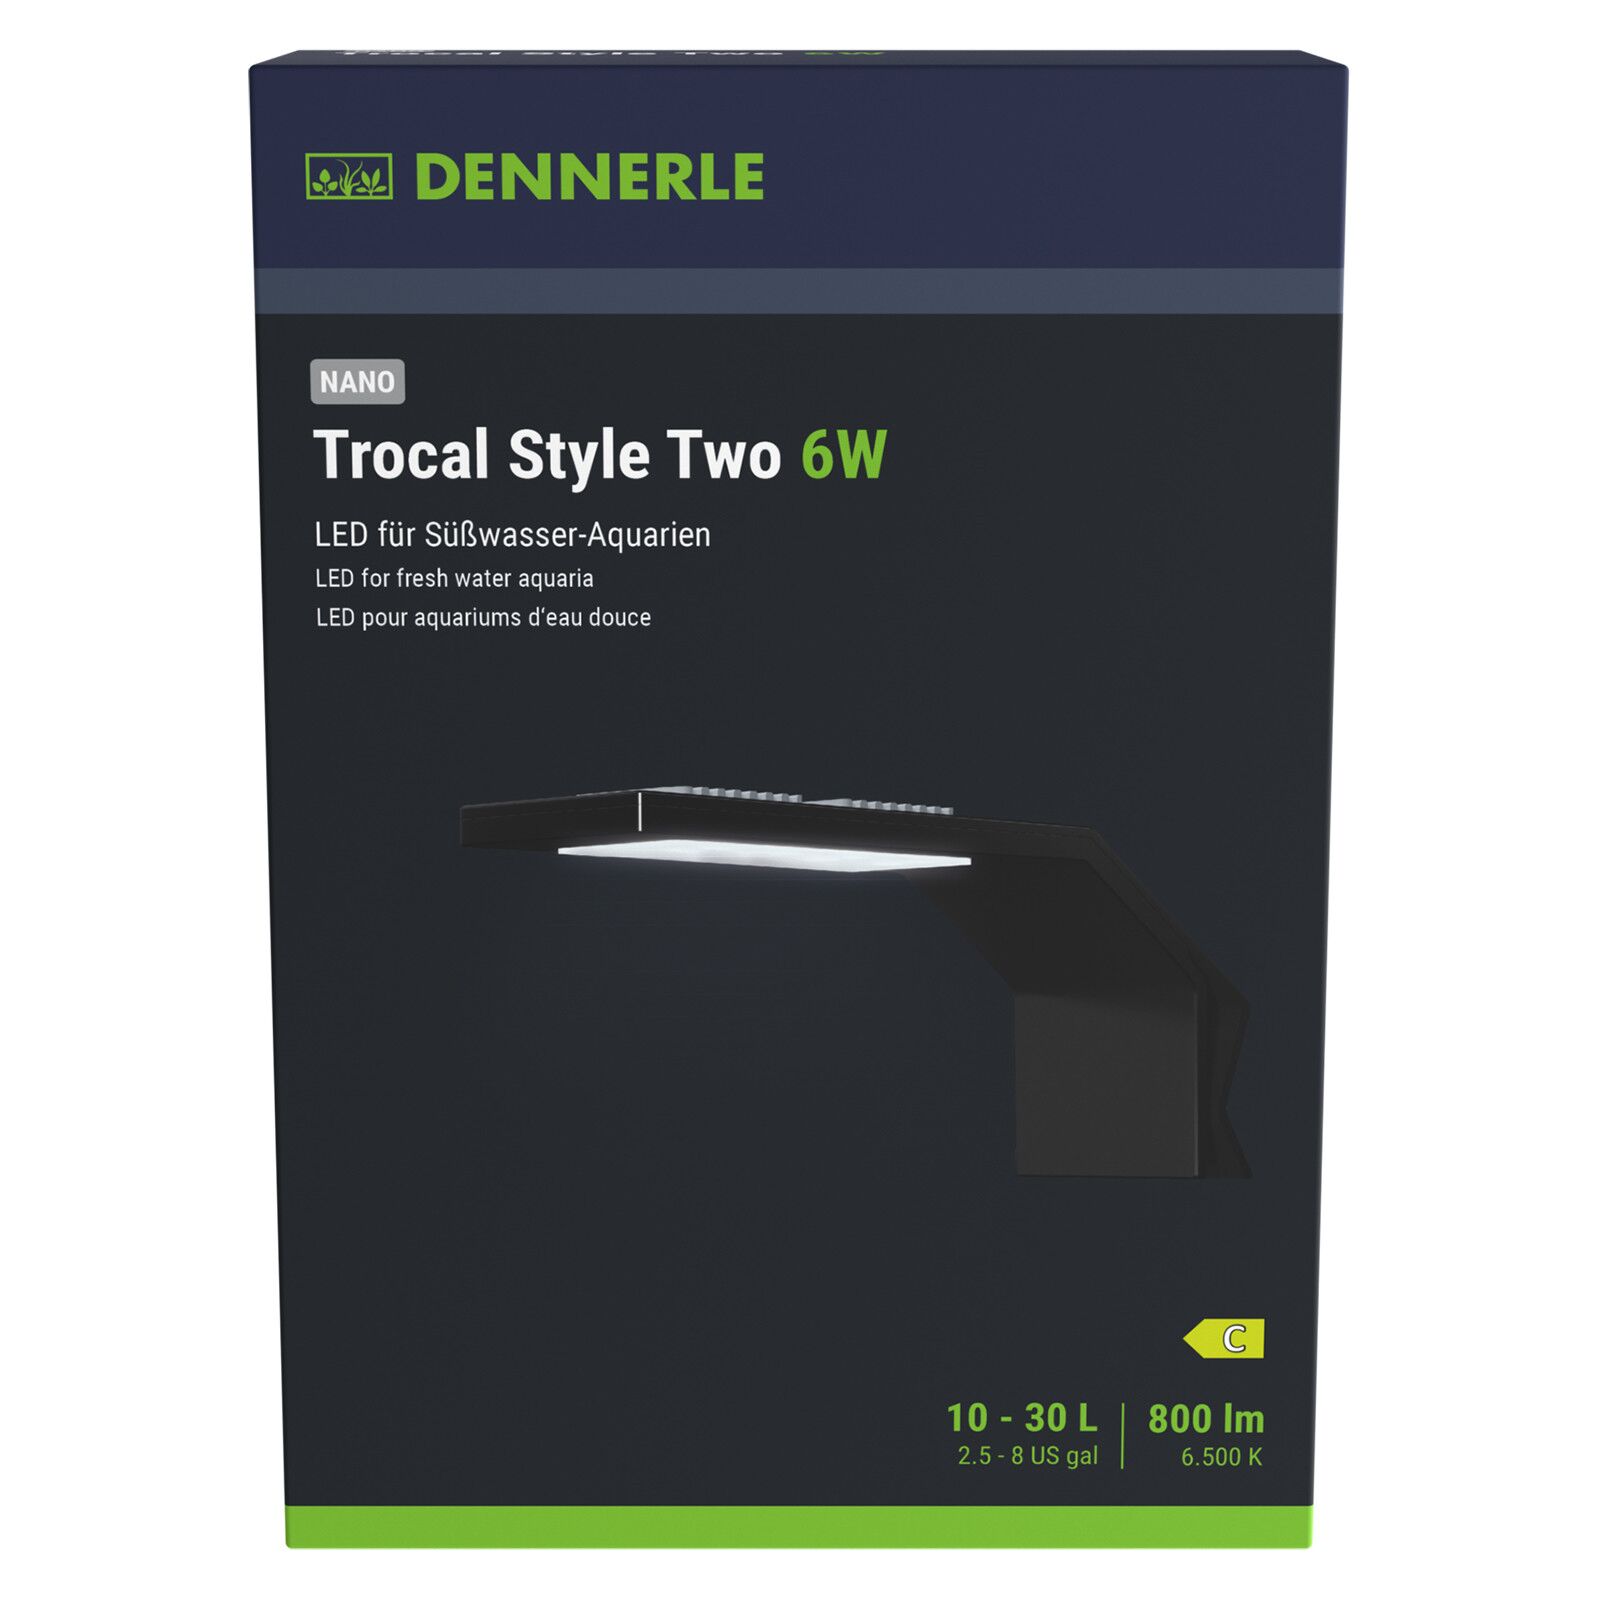 Dennerle - Trocal Style Two